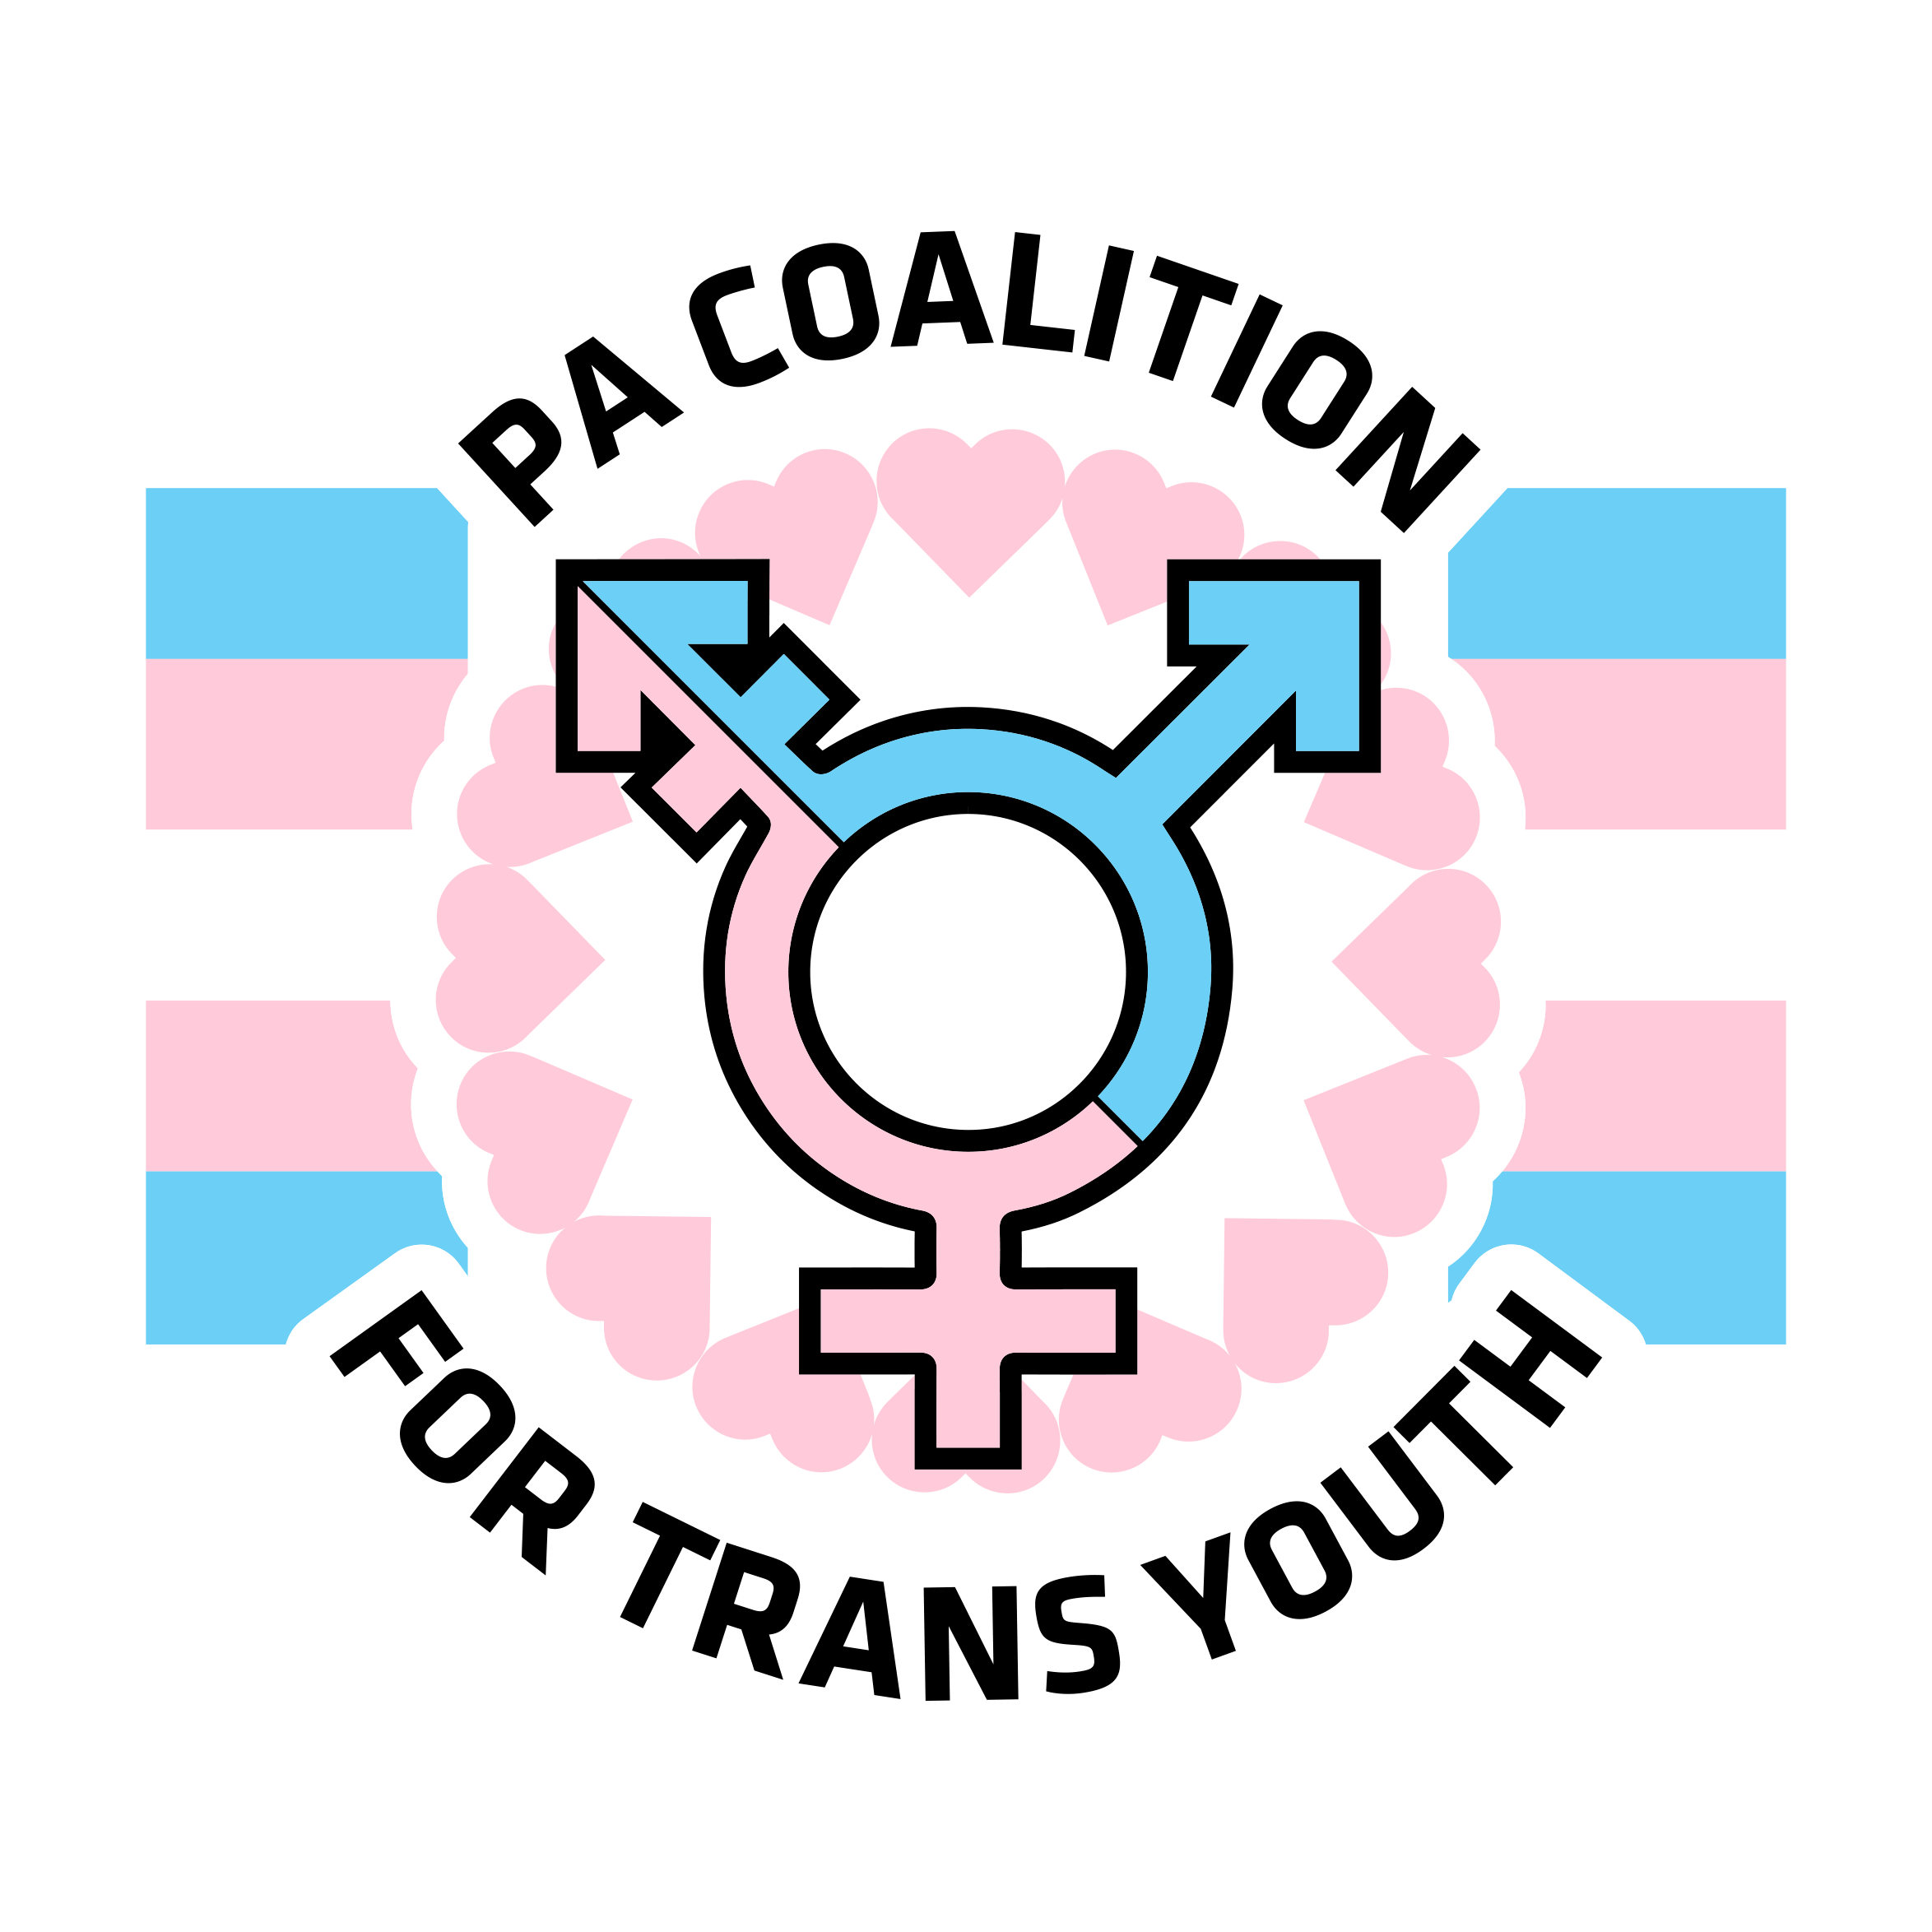 PA COALITION FOR TRANS YOUTH